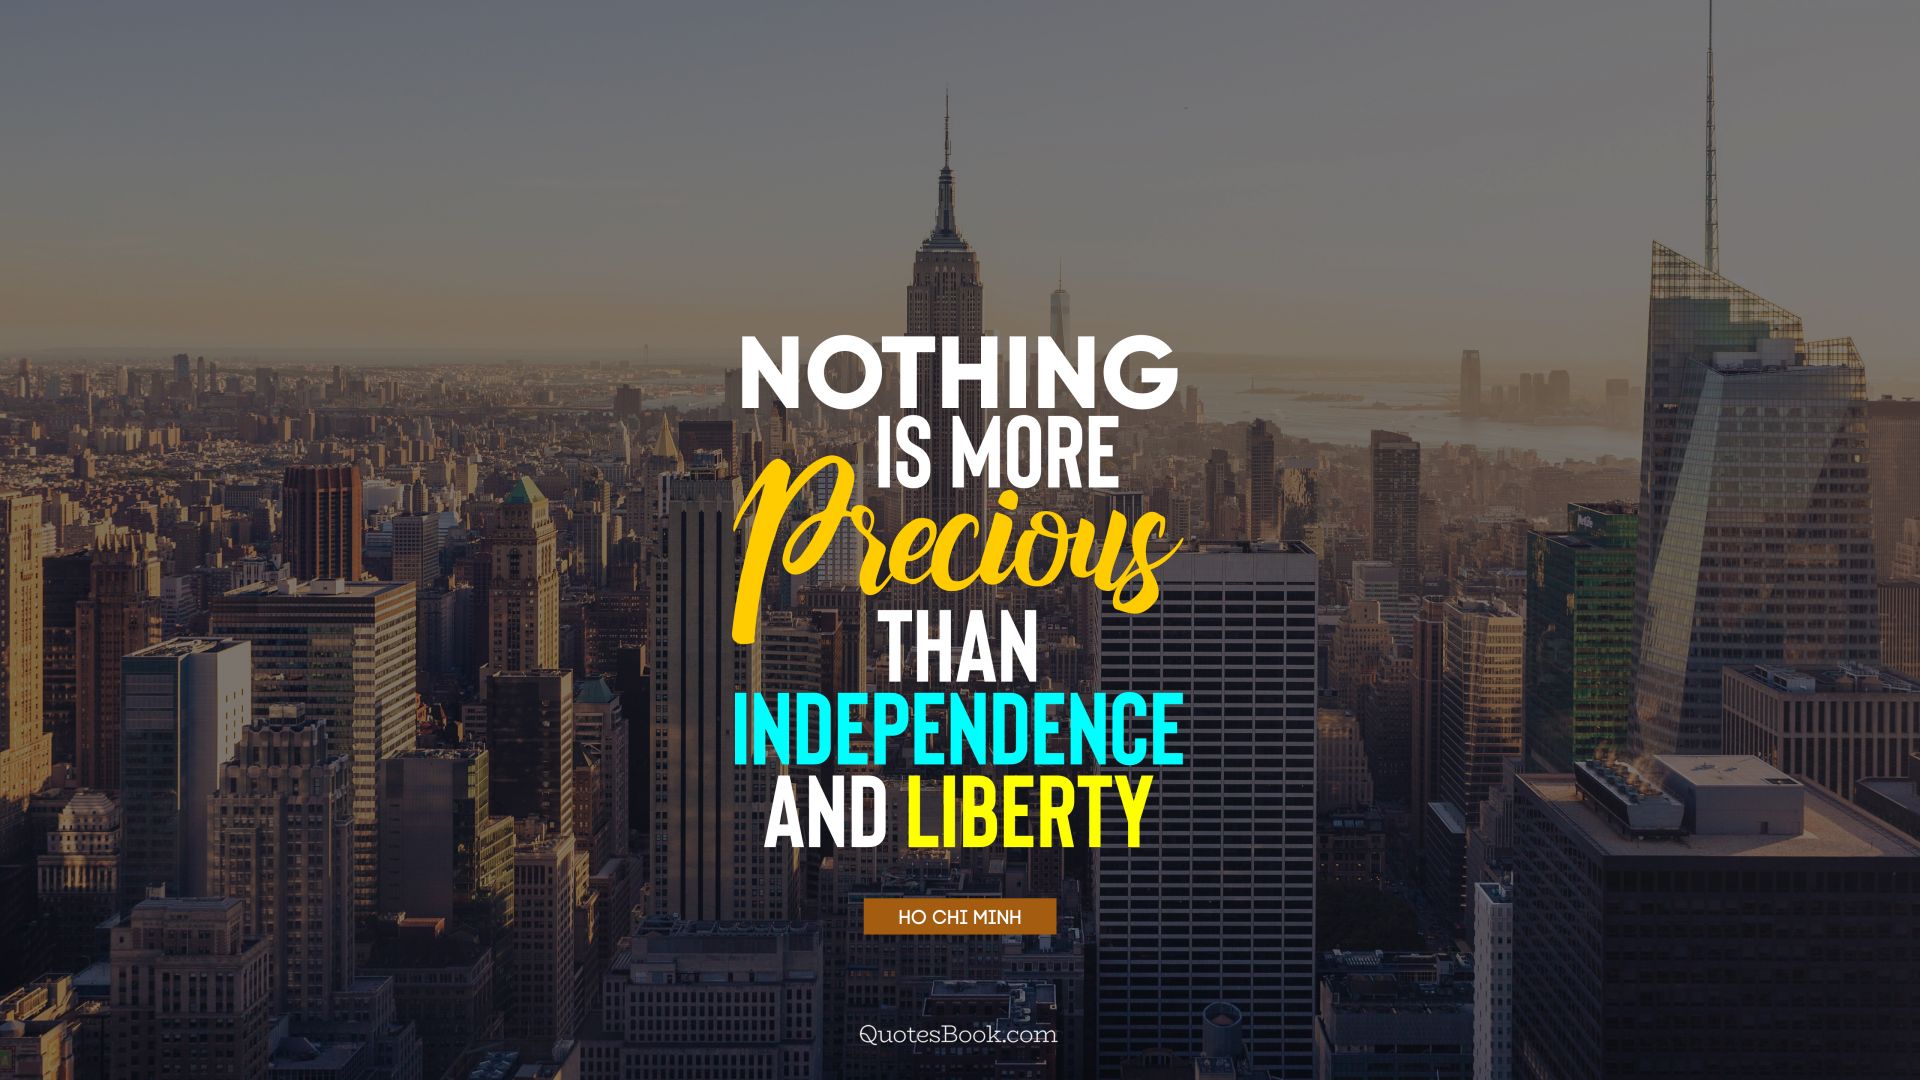 Nothing is more precious than independence and liberty. - Quote by Ho Chi Minh